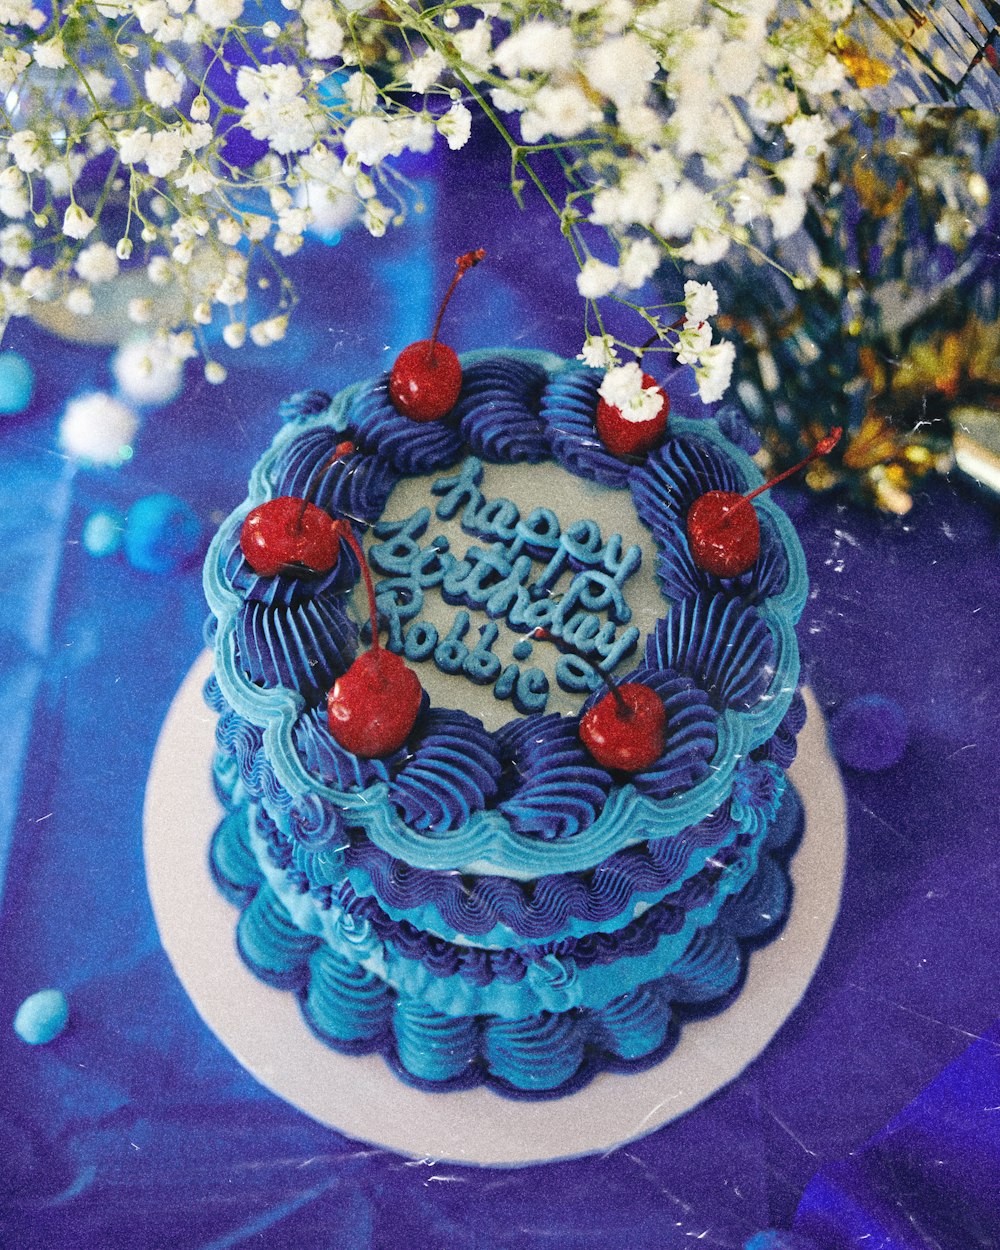 a blue birthday cake with cherries on top